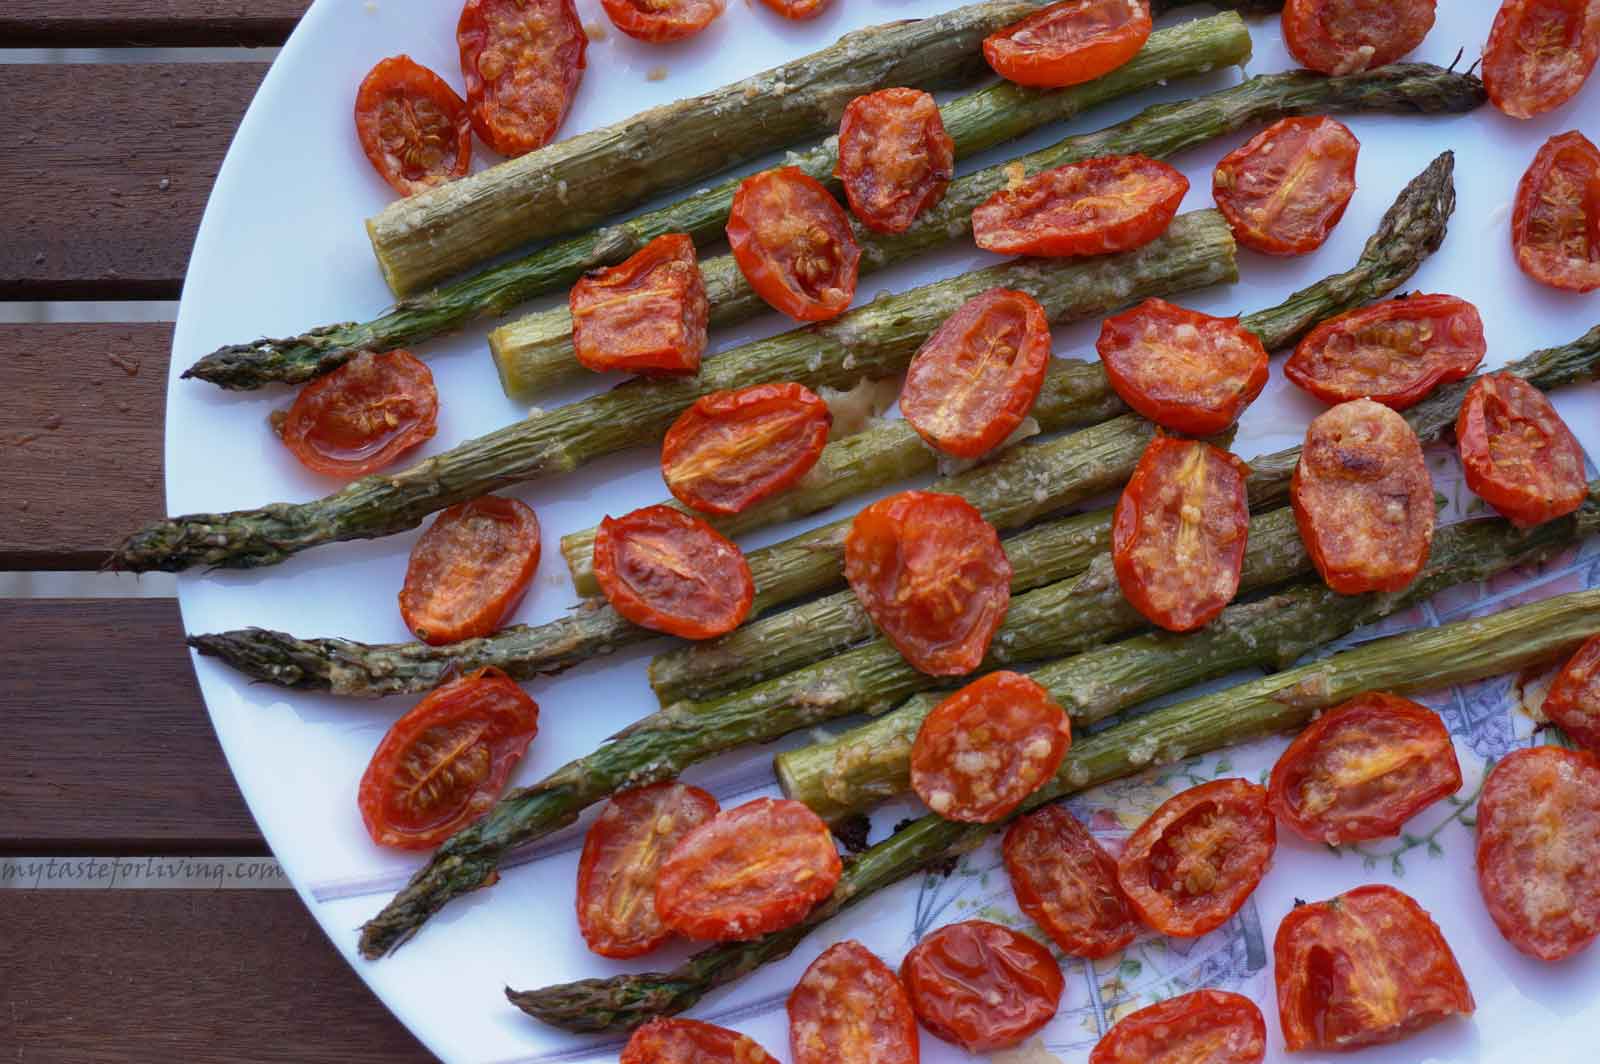 Baking asparagus is super easy and fast! I have been planning to share this recipe with you for a long time. You can serve the roasted asparagus with cherry tomatoes as a main dish or side dish. And if you grate cheese on top of them, you will lick your fingers. 